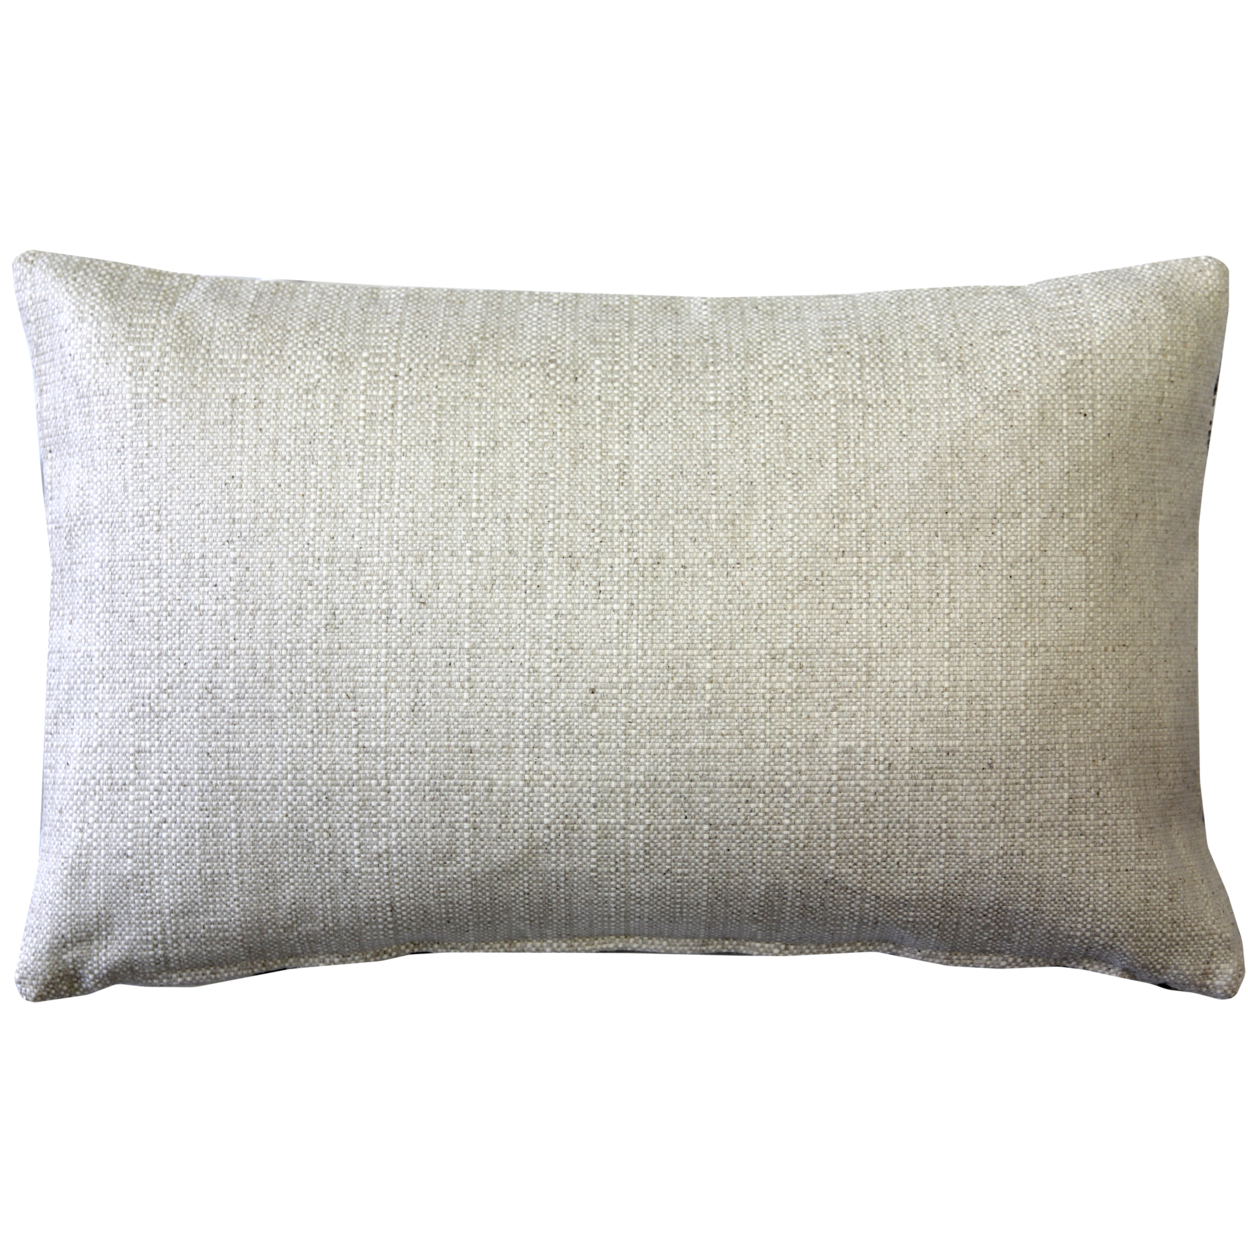 Calliope Gray Damask Pattern Throw Pillow 12x20 Inches Square, Complete Pillow With Polyfill Pillow Insert